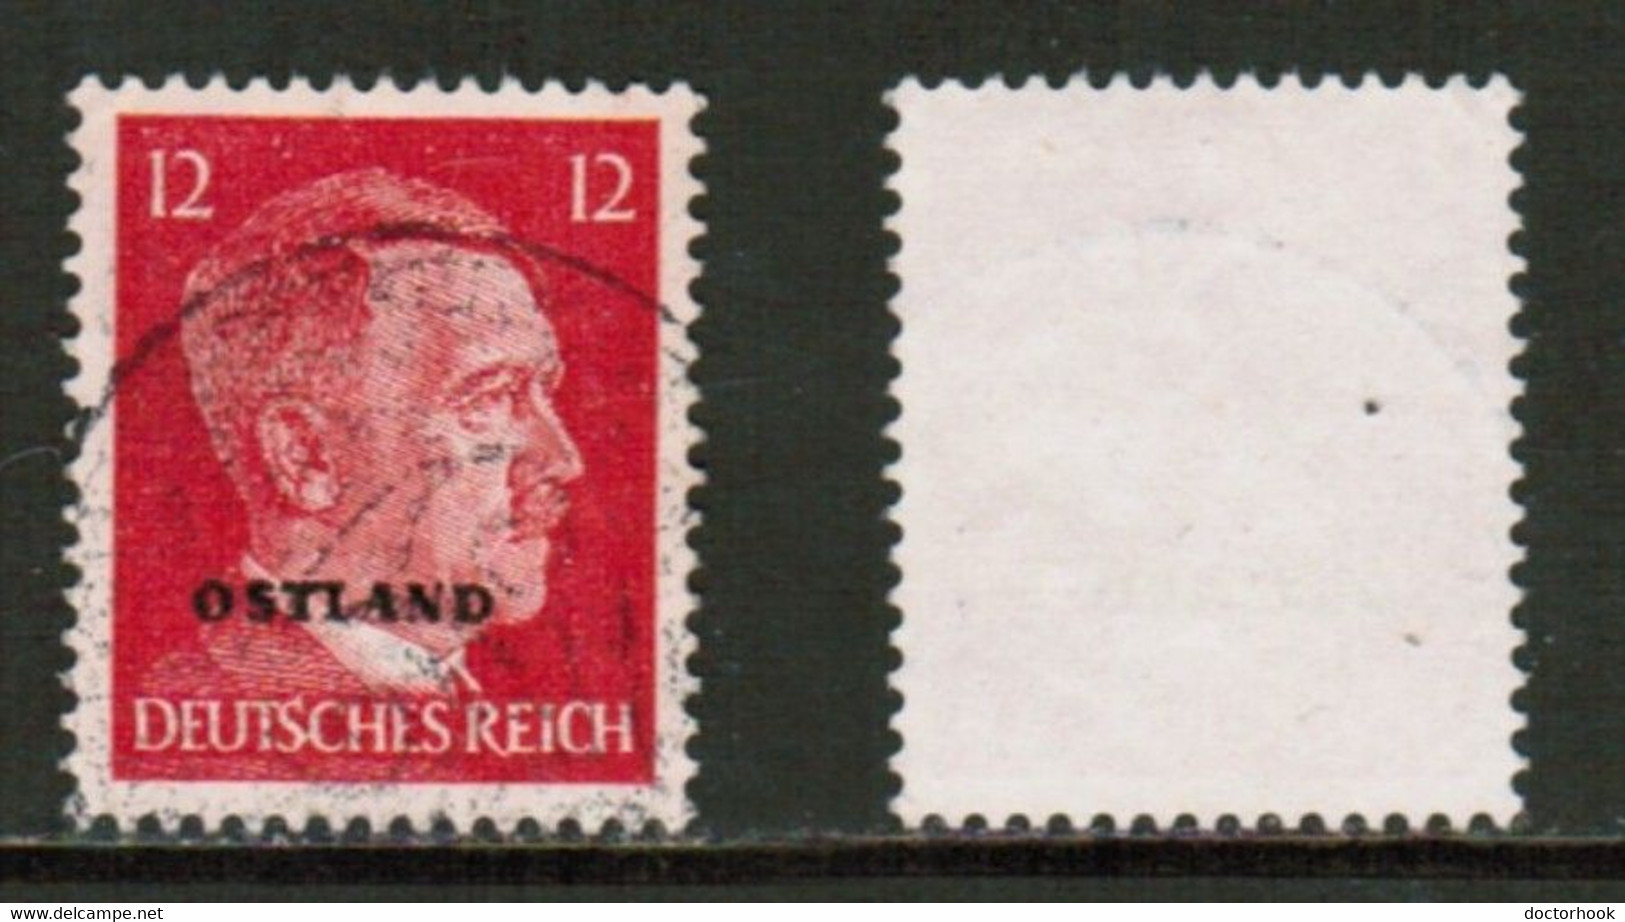 RUSSIA---German Occupation   Scott # N 16 USED (CONDITION AS PER SCAN) (Stamp Scan # 847-6) - 1941-43 Occupation Allemande